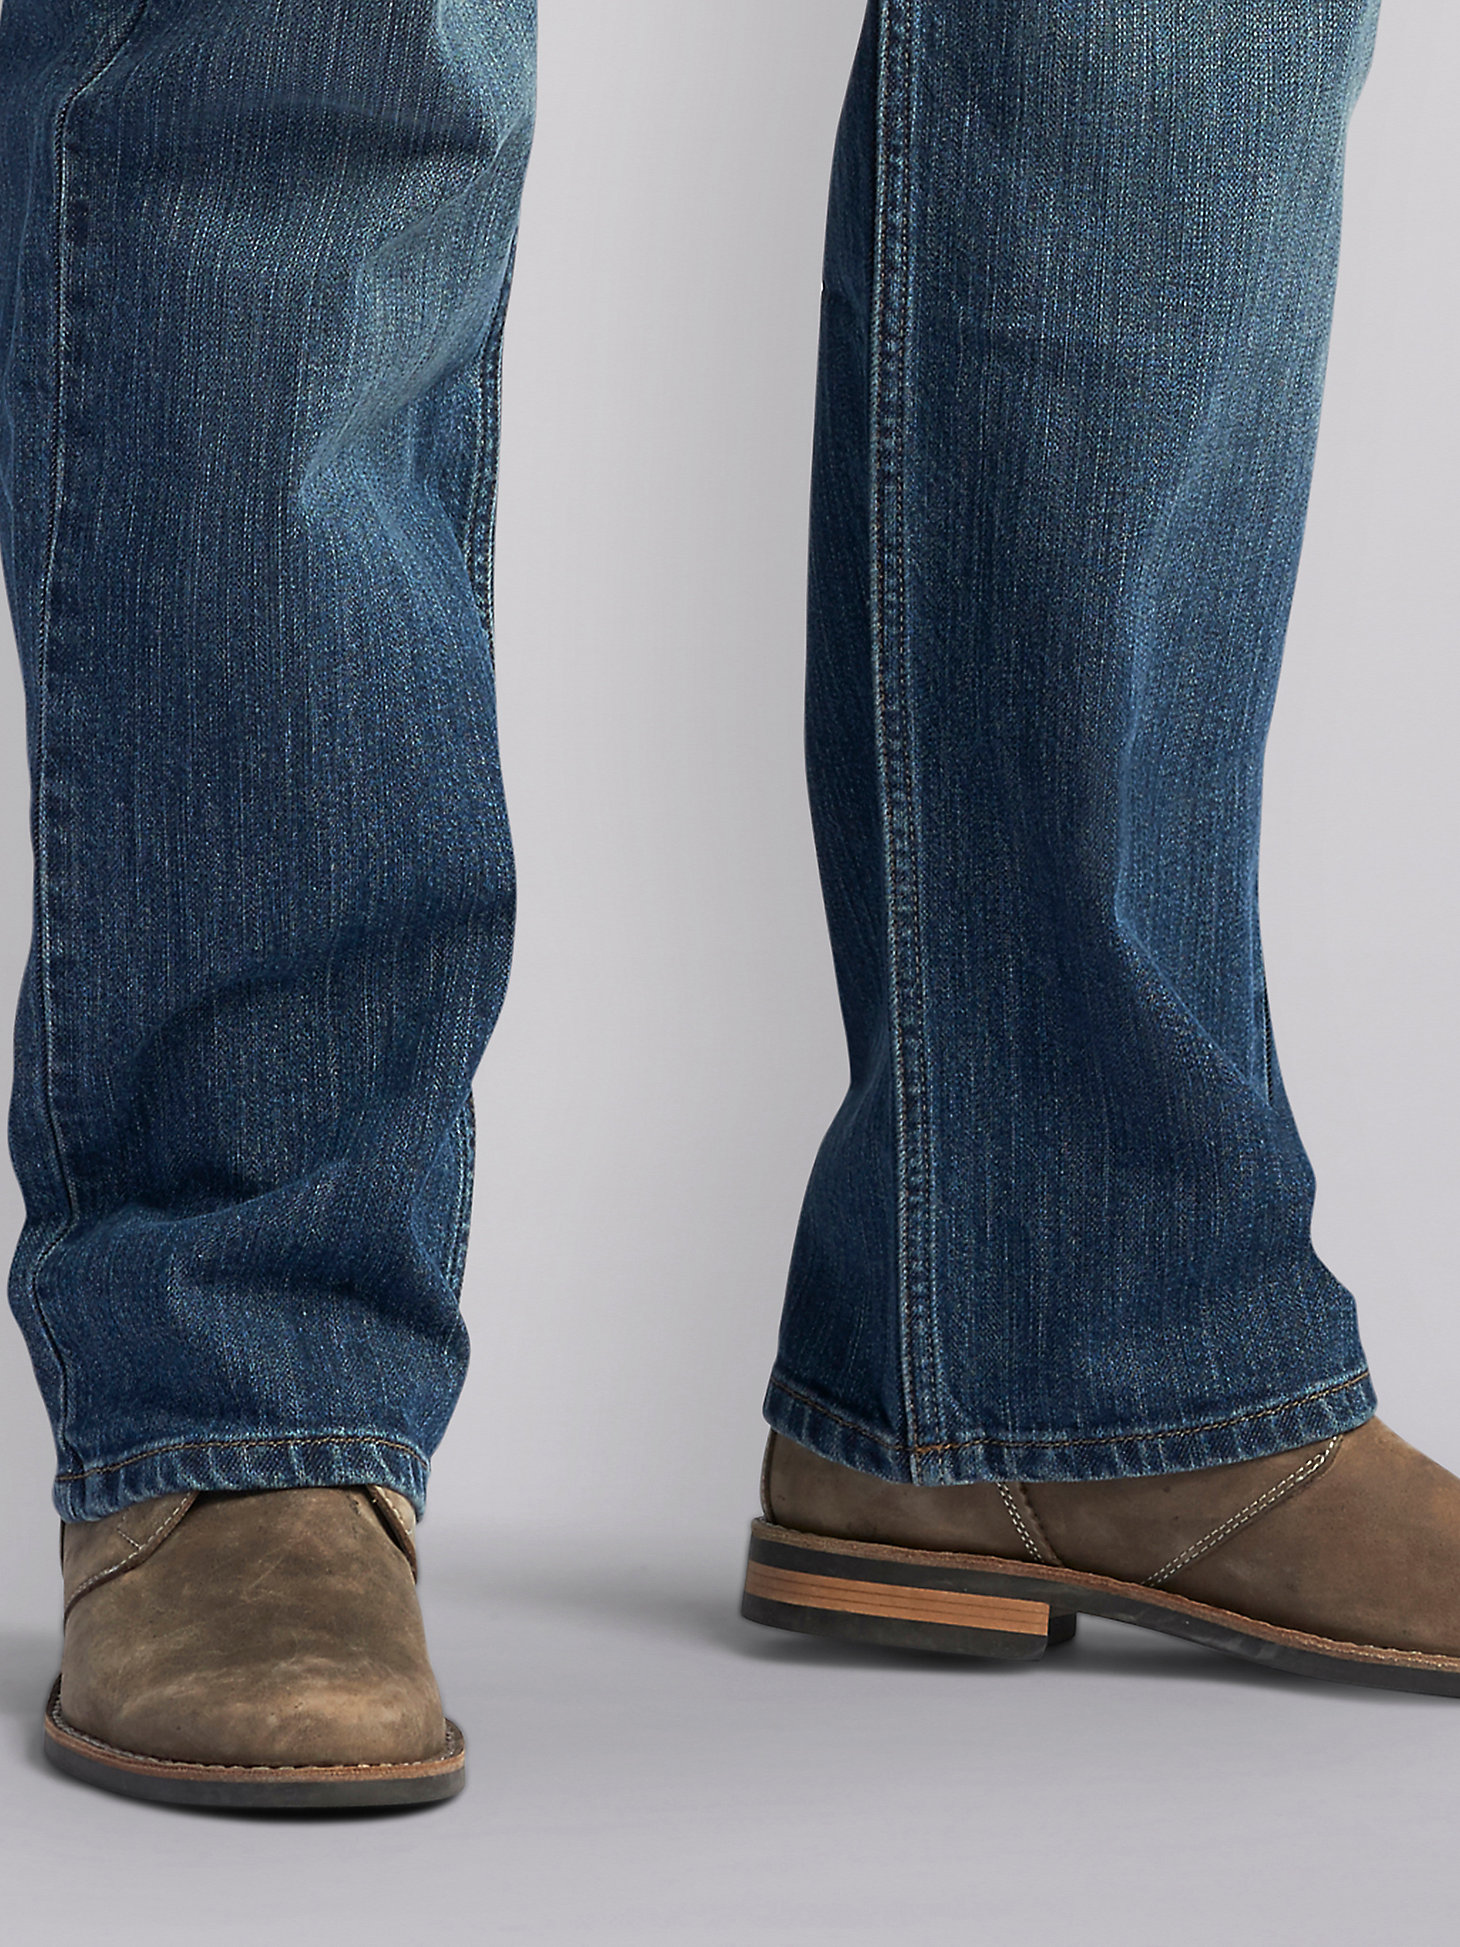 Men’s Premium Select Relaxed Fit Straight Leg Jean (Big&Tall) in Thatch alternative view 2